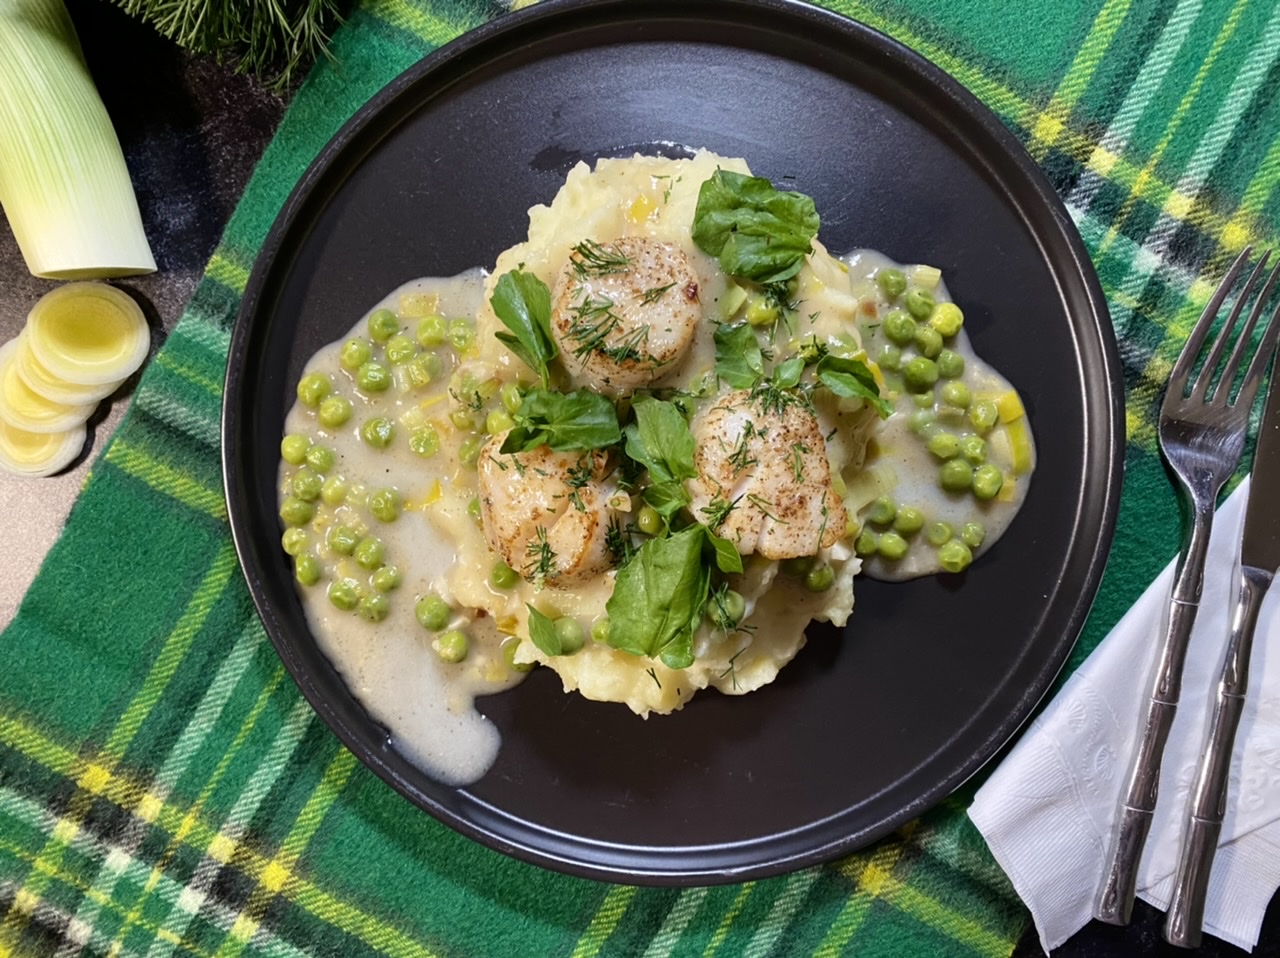 Irish scallops with peas and leeks over mashed potatoes on a black plate